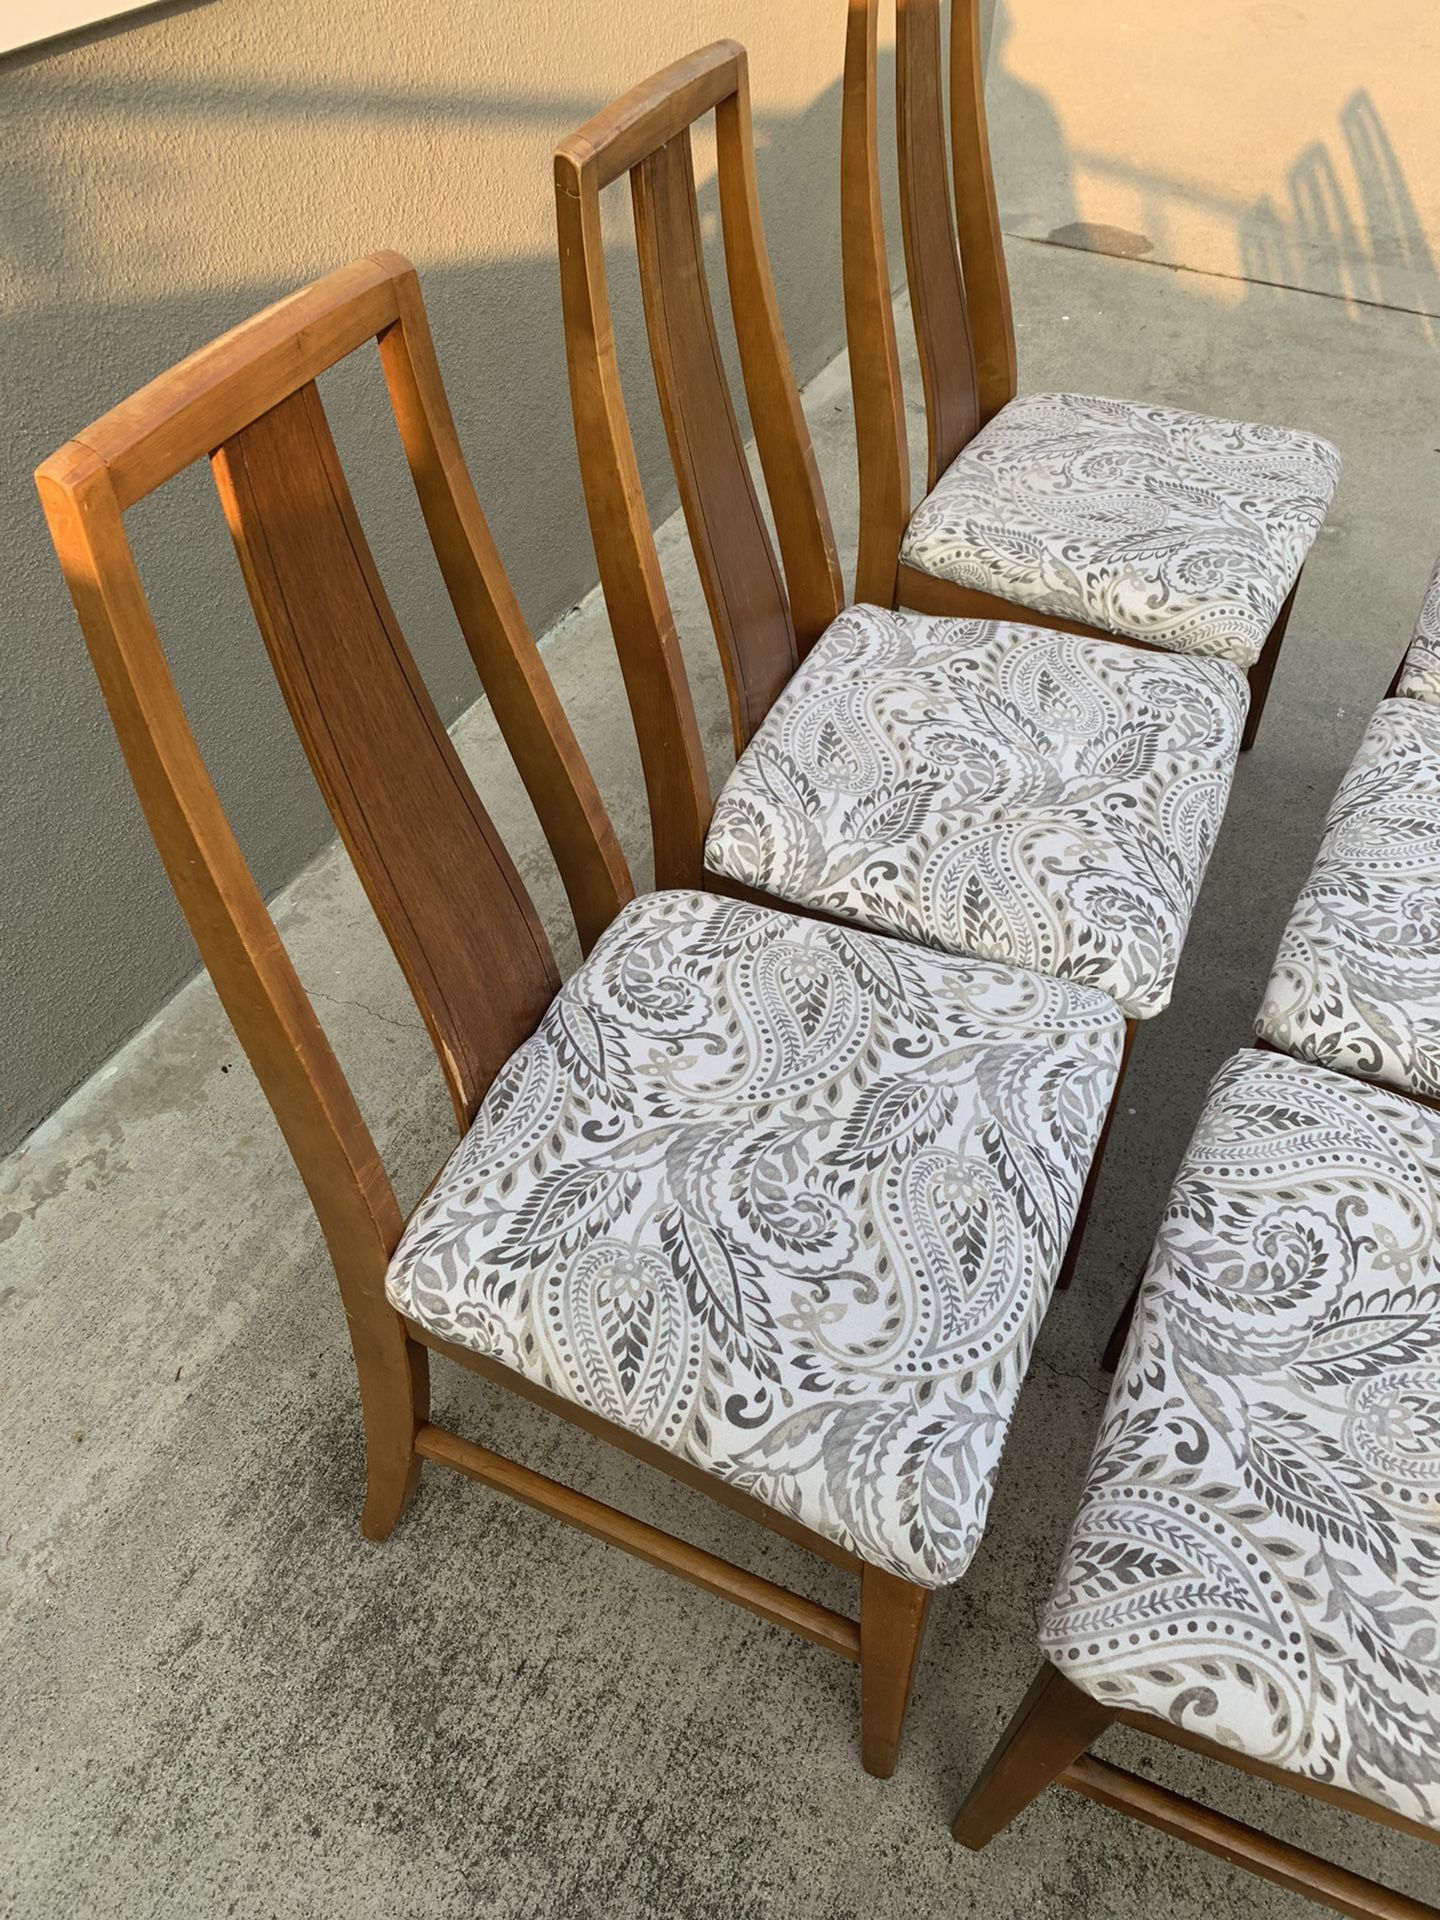 Six Vintage Dining Chairs - FREE